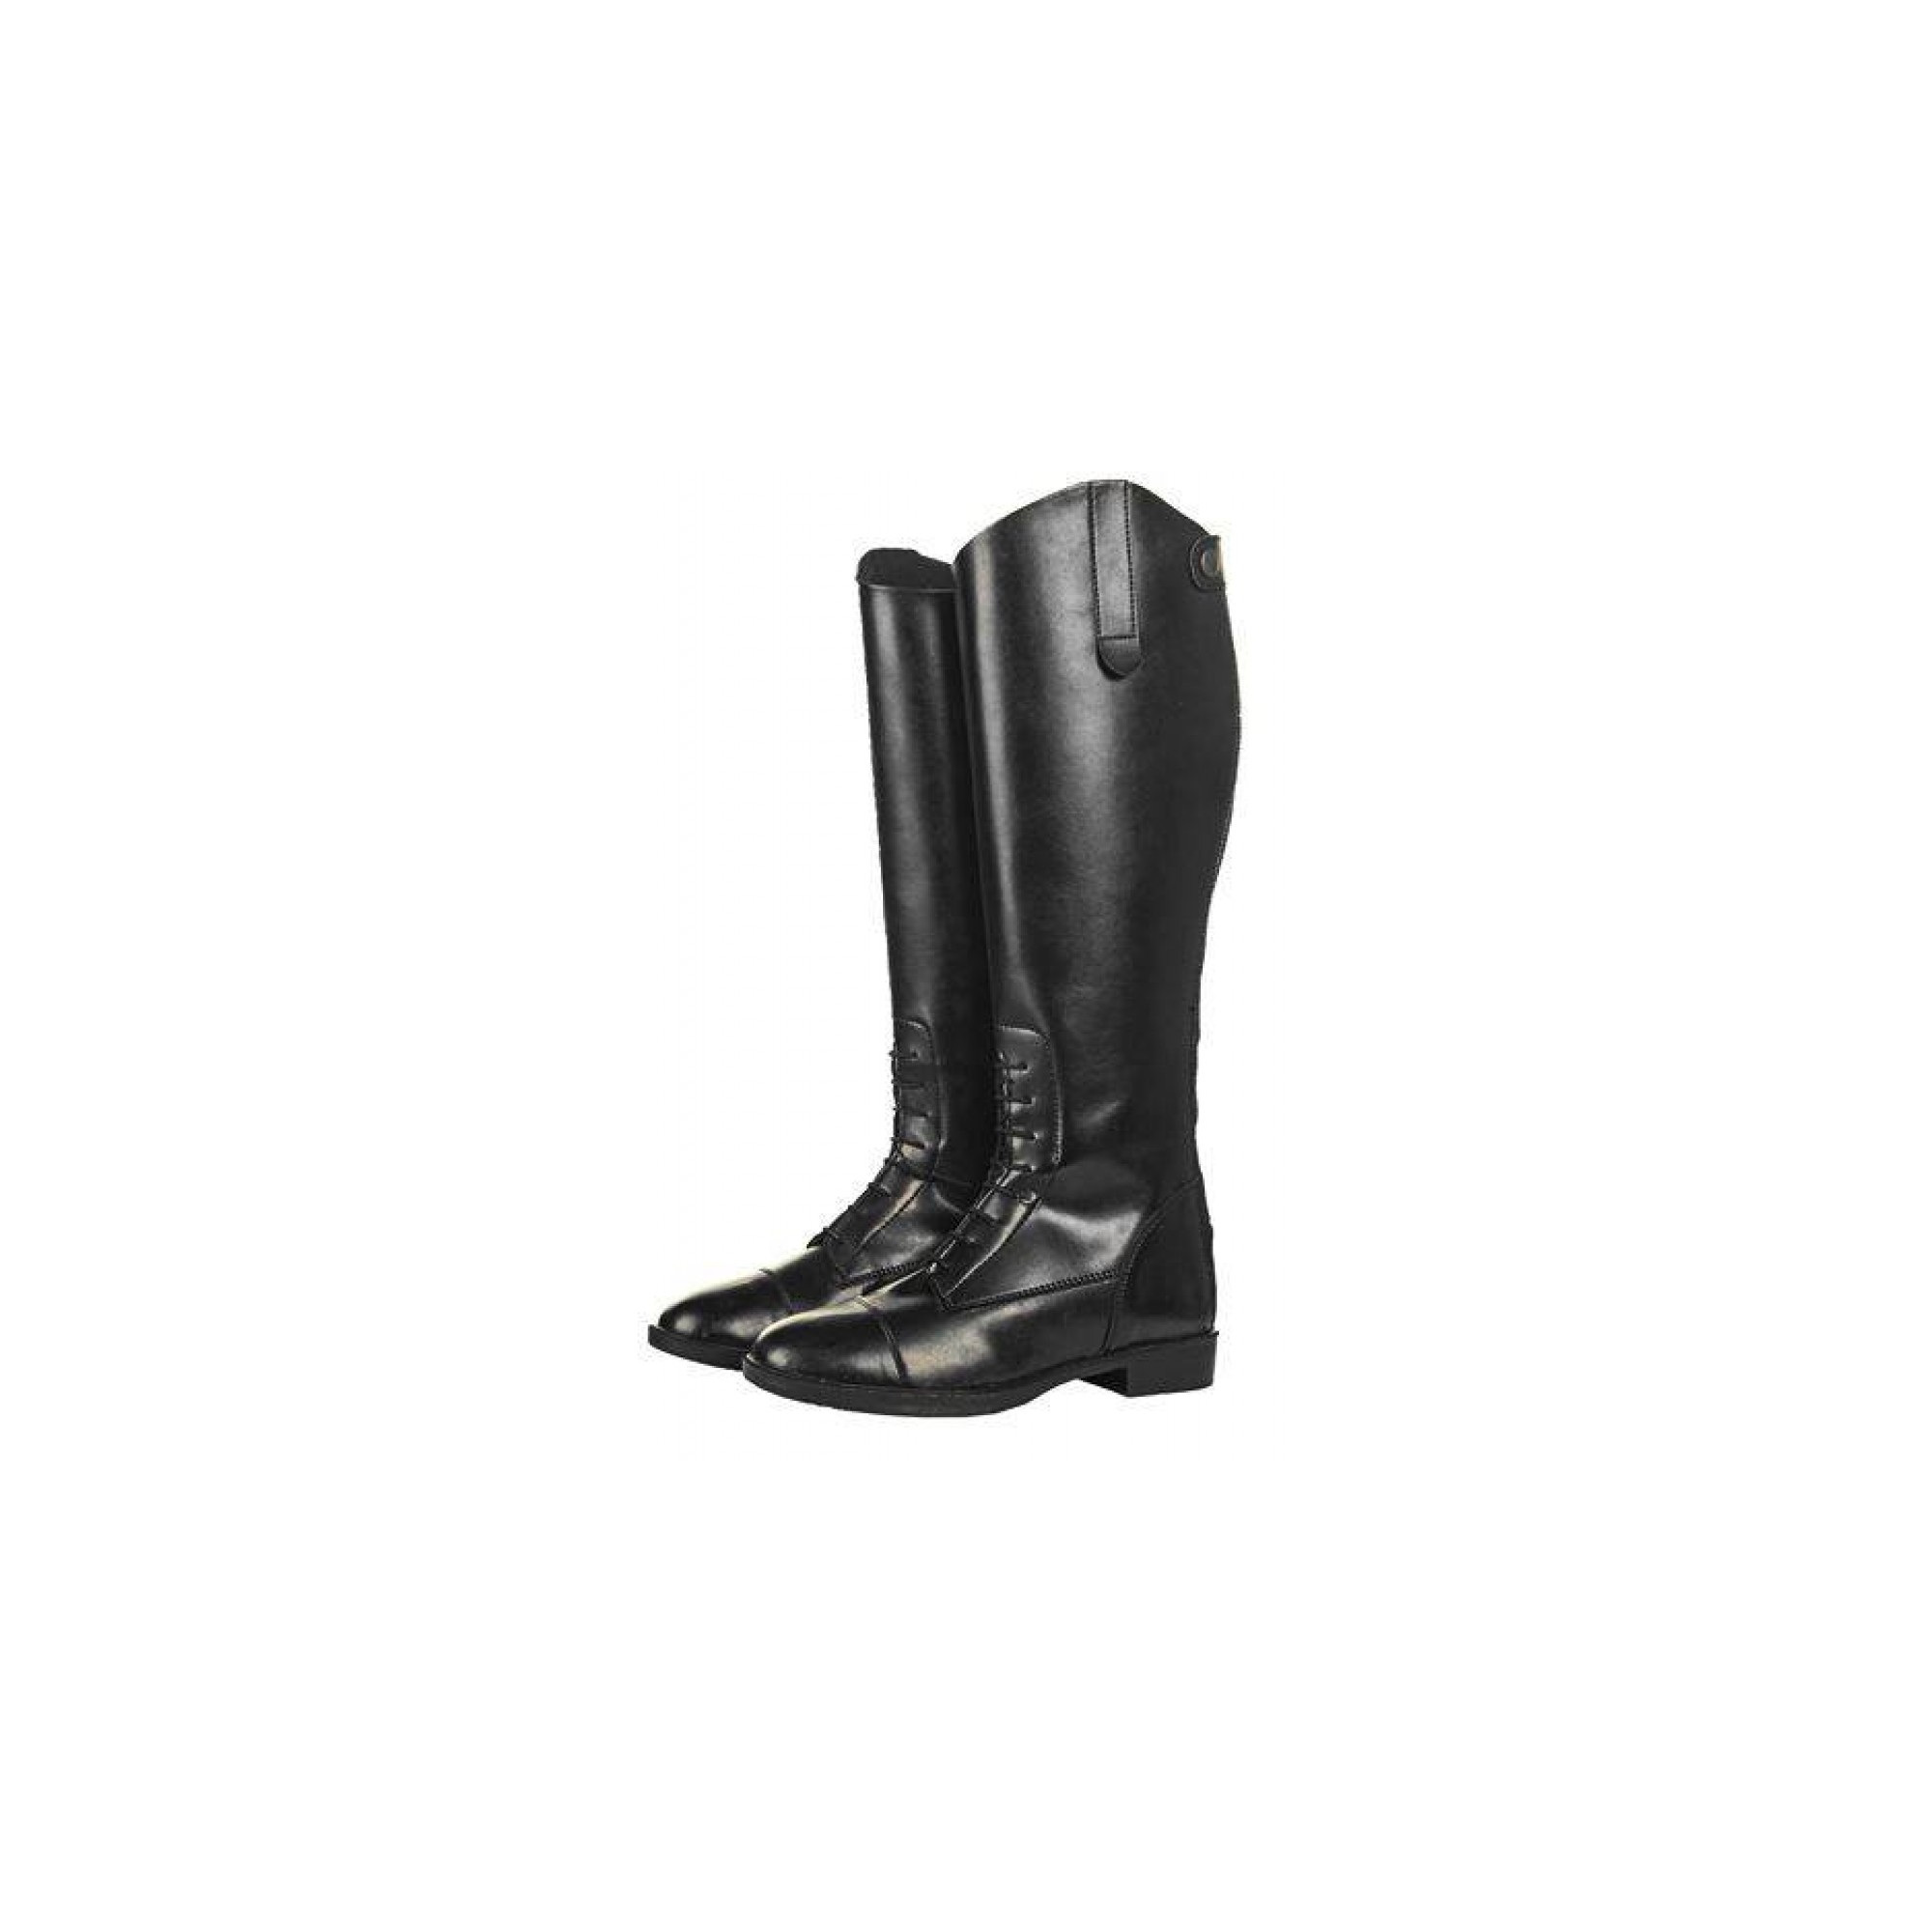 SOFT PADDING HKM Boots New Fashion Women Short/Wide COMPLETELY LINED 